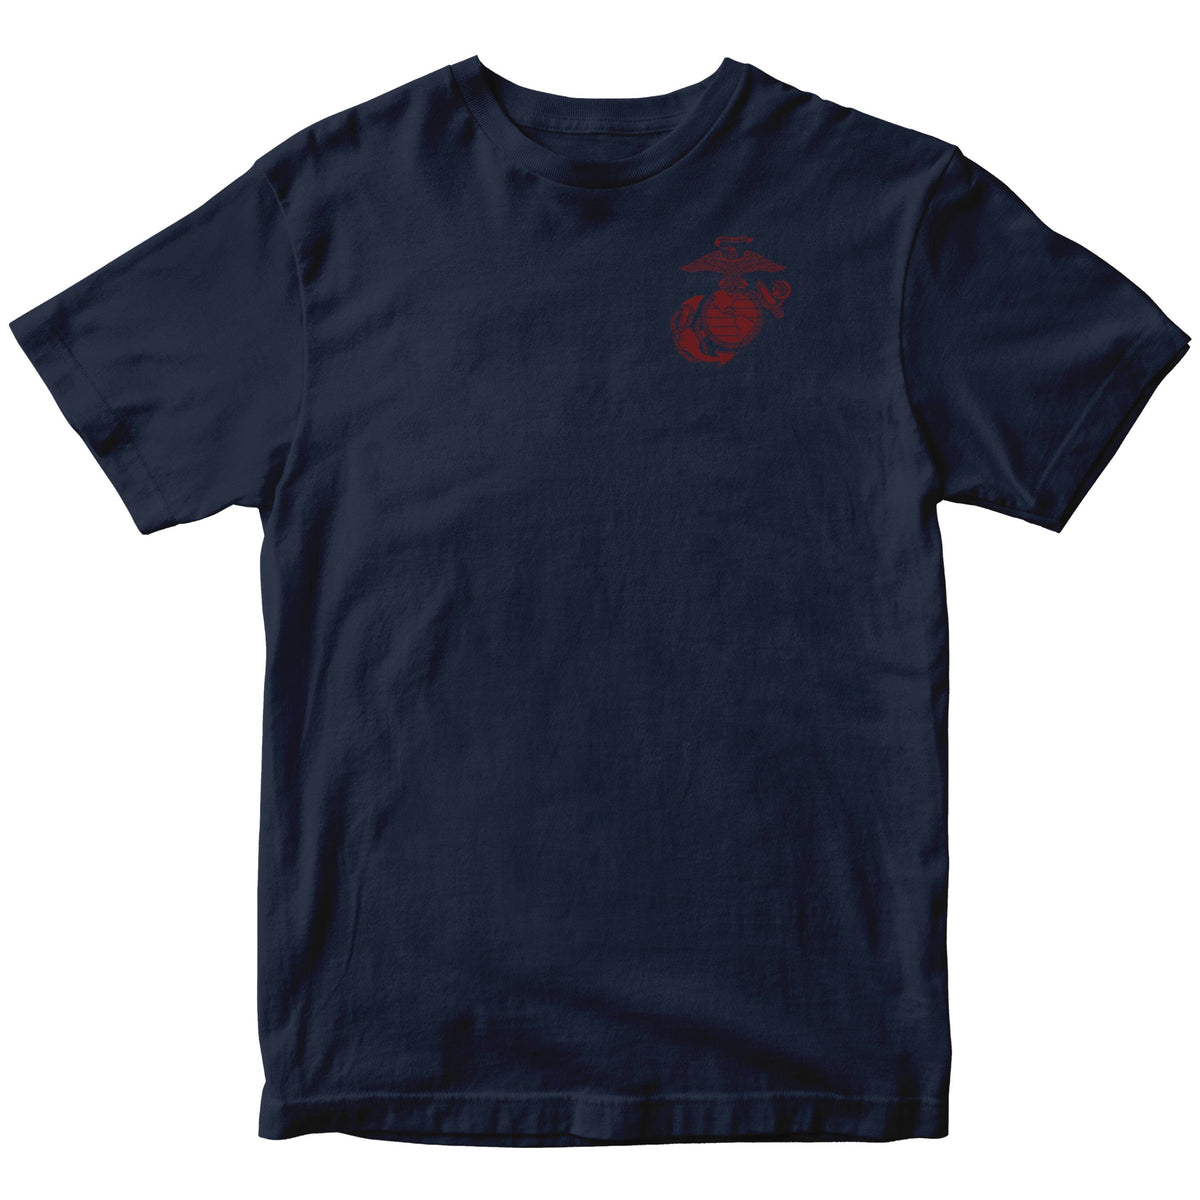 Closeout Red EGA Chest Seal on Navy Blue Tee